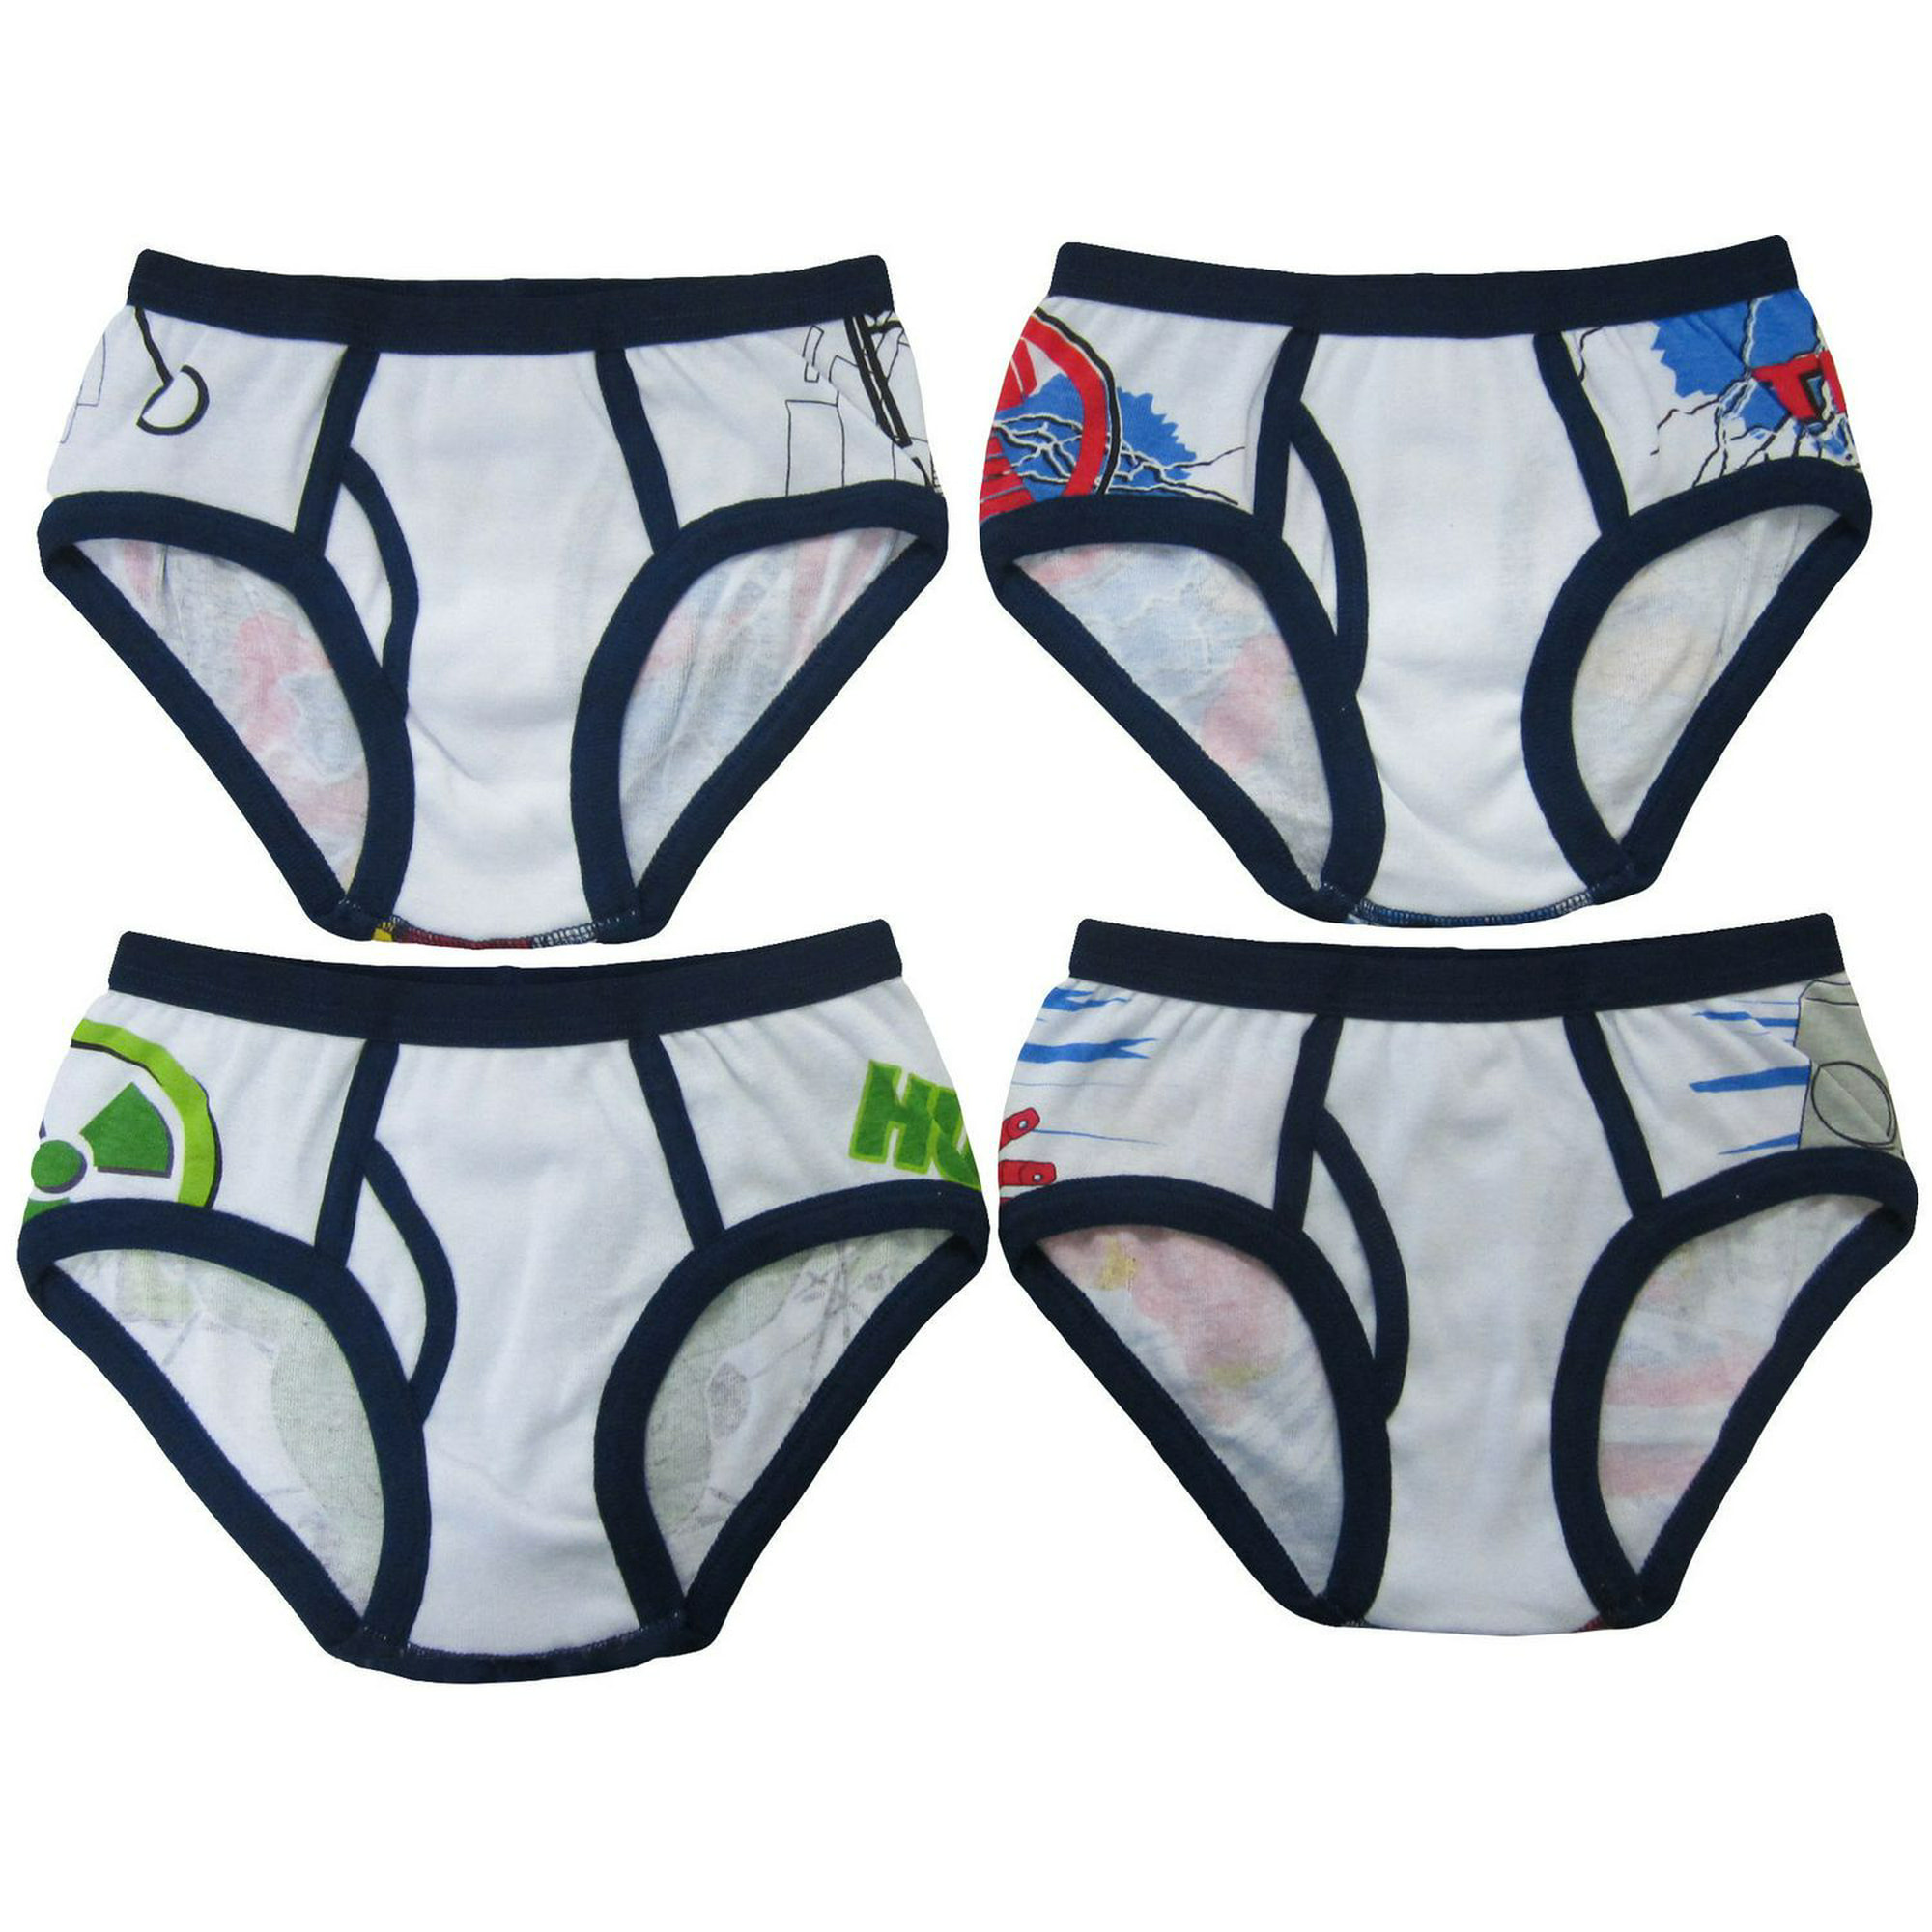 Toddler Boys' 7pk Marvel Classic Briefs 4t - Colors May Vary : Target